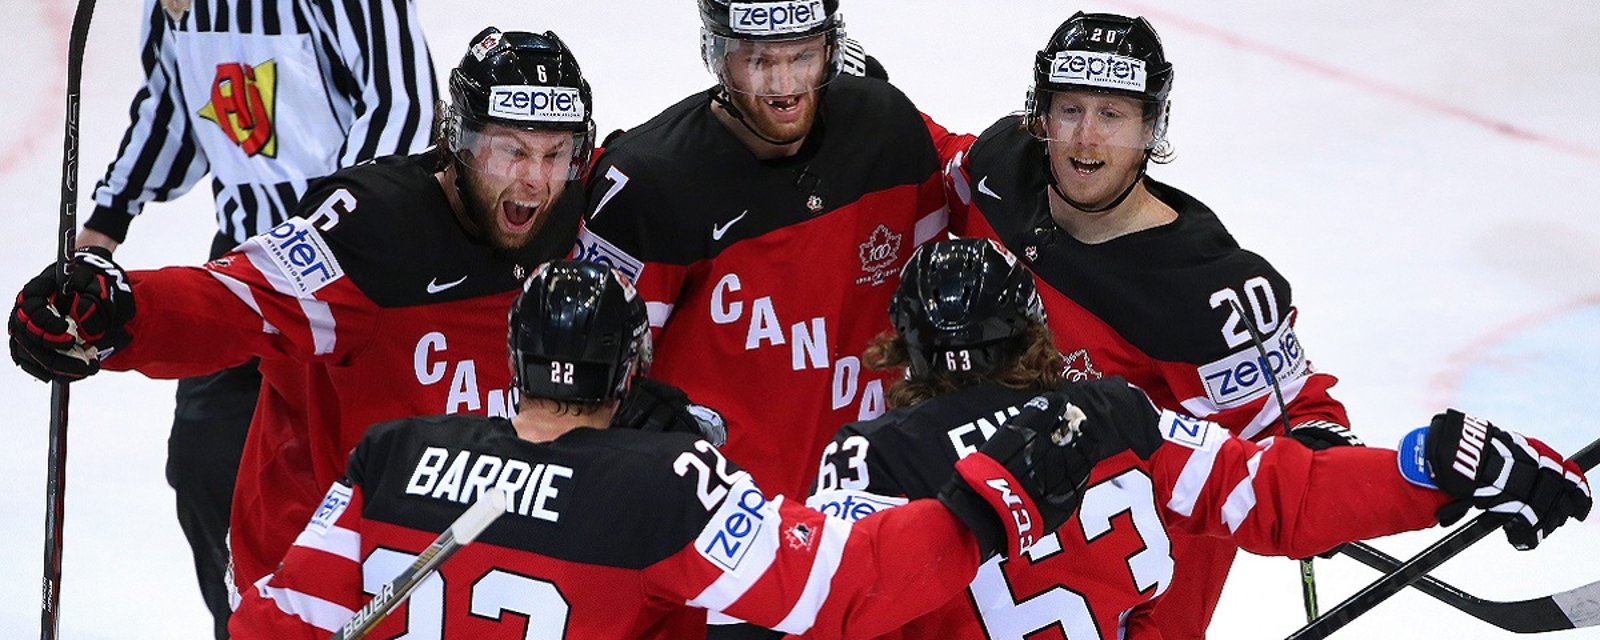 Breaking: Huge injury for Canada at World Championship, defenseman done for the tournament.